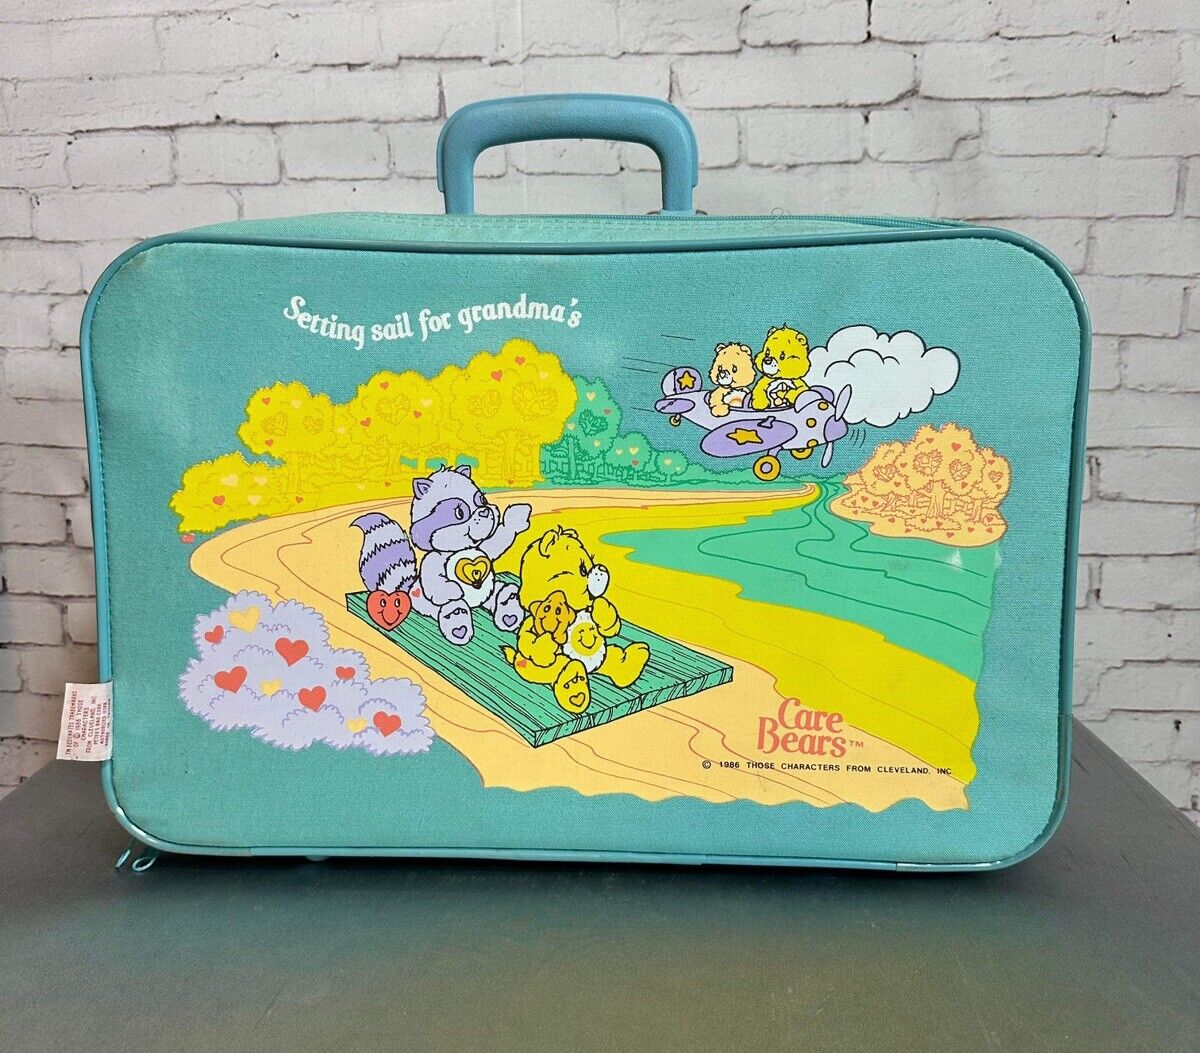 Vintage Care Bears 1986 Suitcase Luggage Blue Setting Sail For Grandma’s 16 X 10